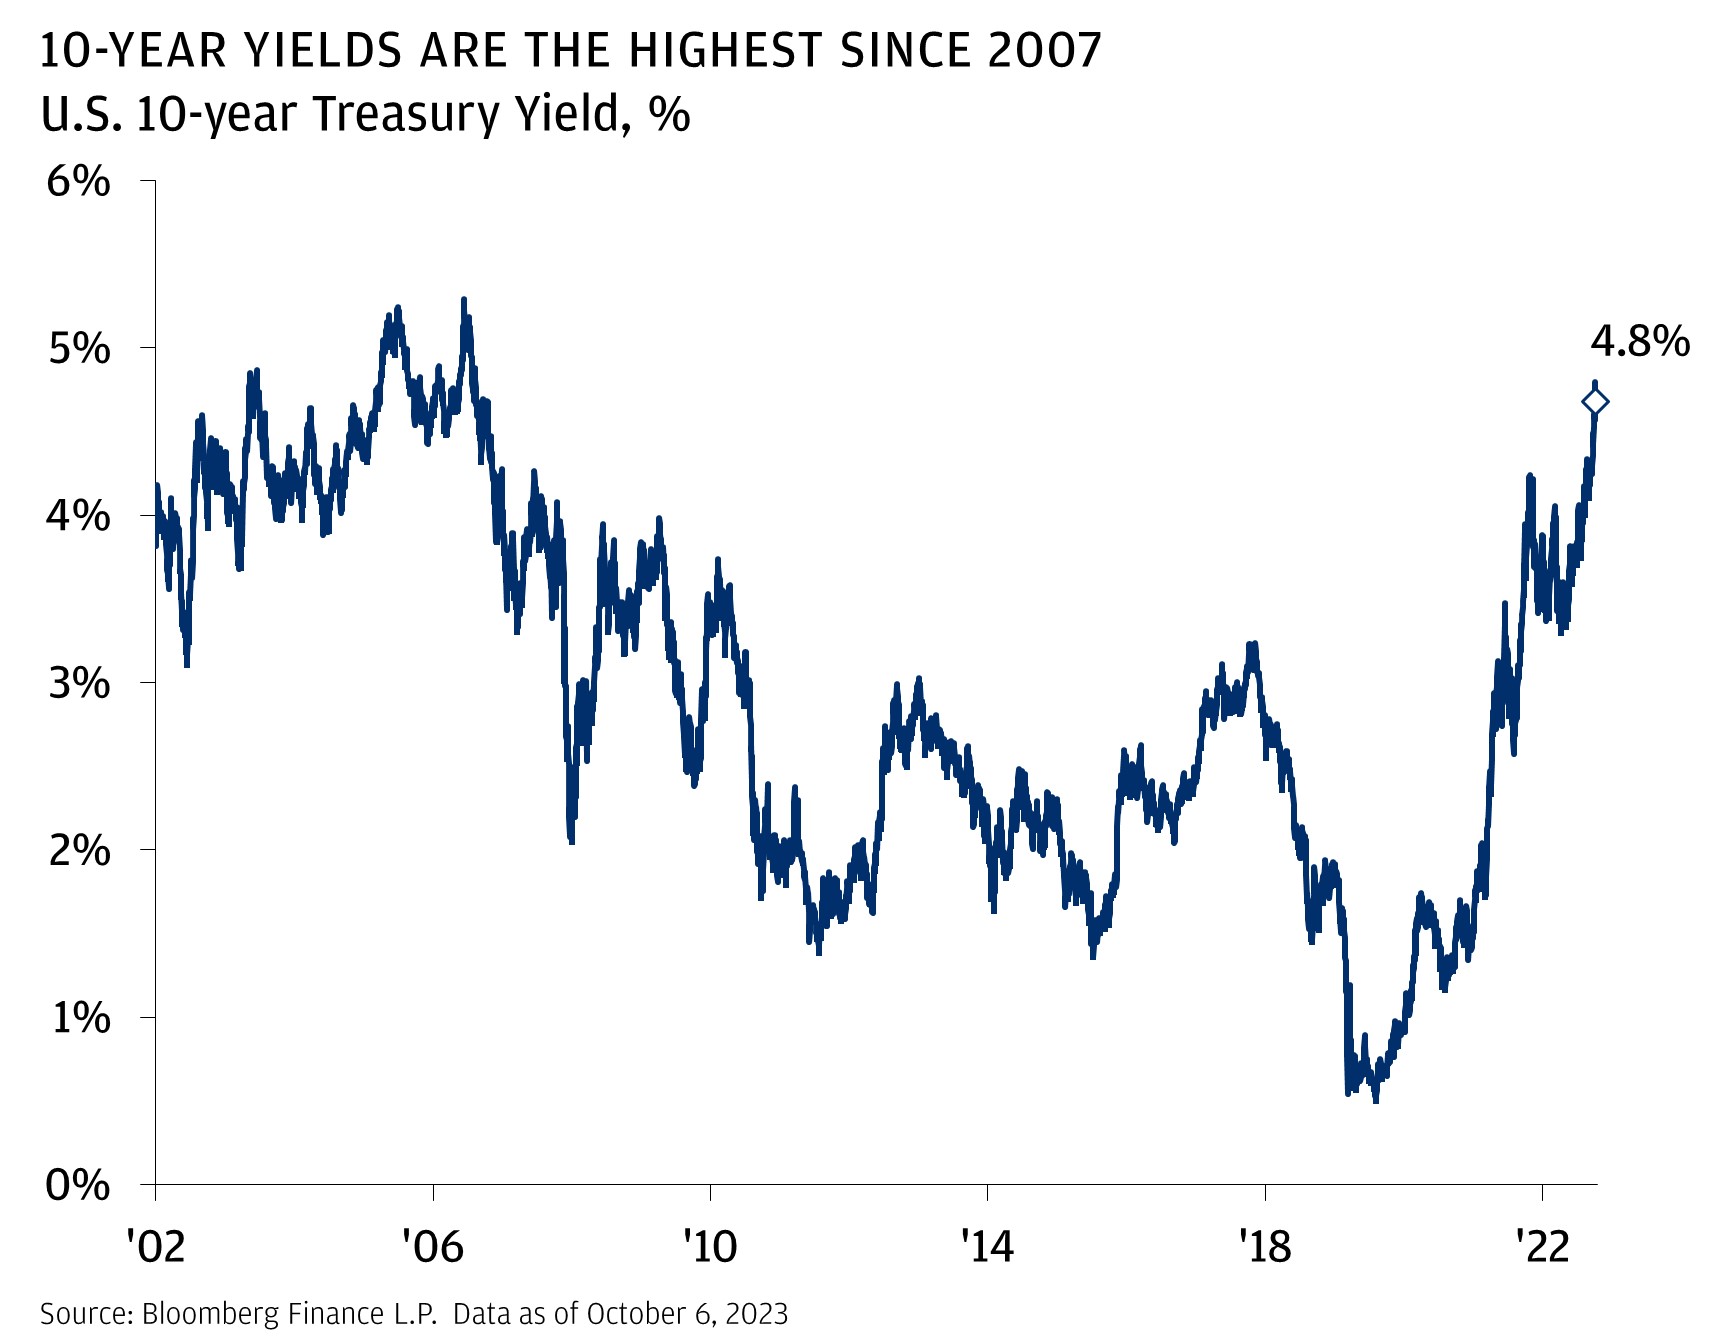 This chart shows the U.S 10-year Treasury yield from 2020 to 2023. It is at 4.1% in March 2003, then increases to 5.3% in June 2007. It then fell to 3.1% in November 2018, and further fell 0.5% in August 2020. It then rose to 4.8% in October 2023.